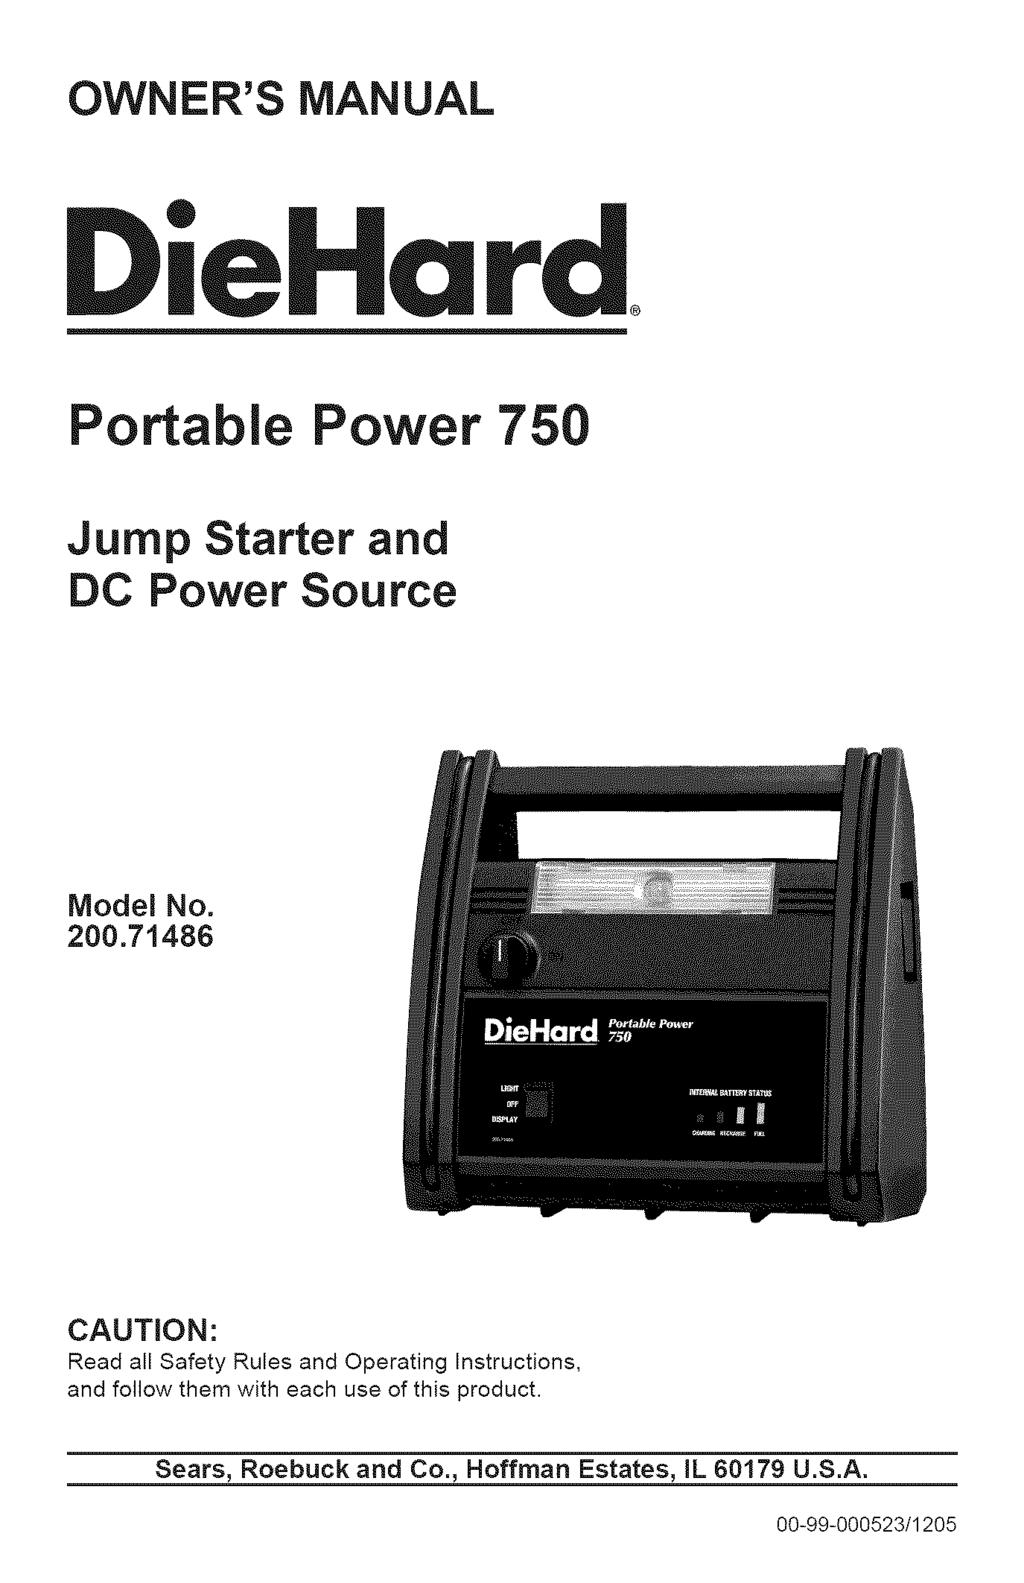 OWNER'S MANUAL " Ird Portable Power 750 Jump Starter and DC Power Source Model No. 200.